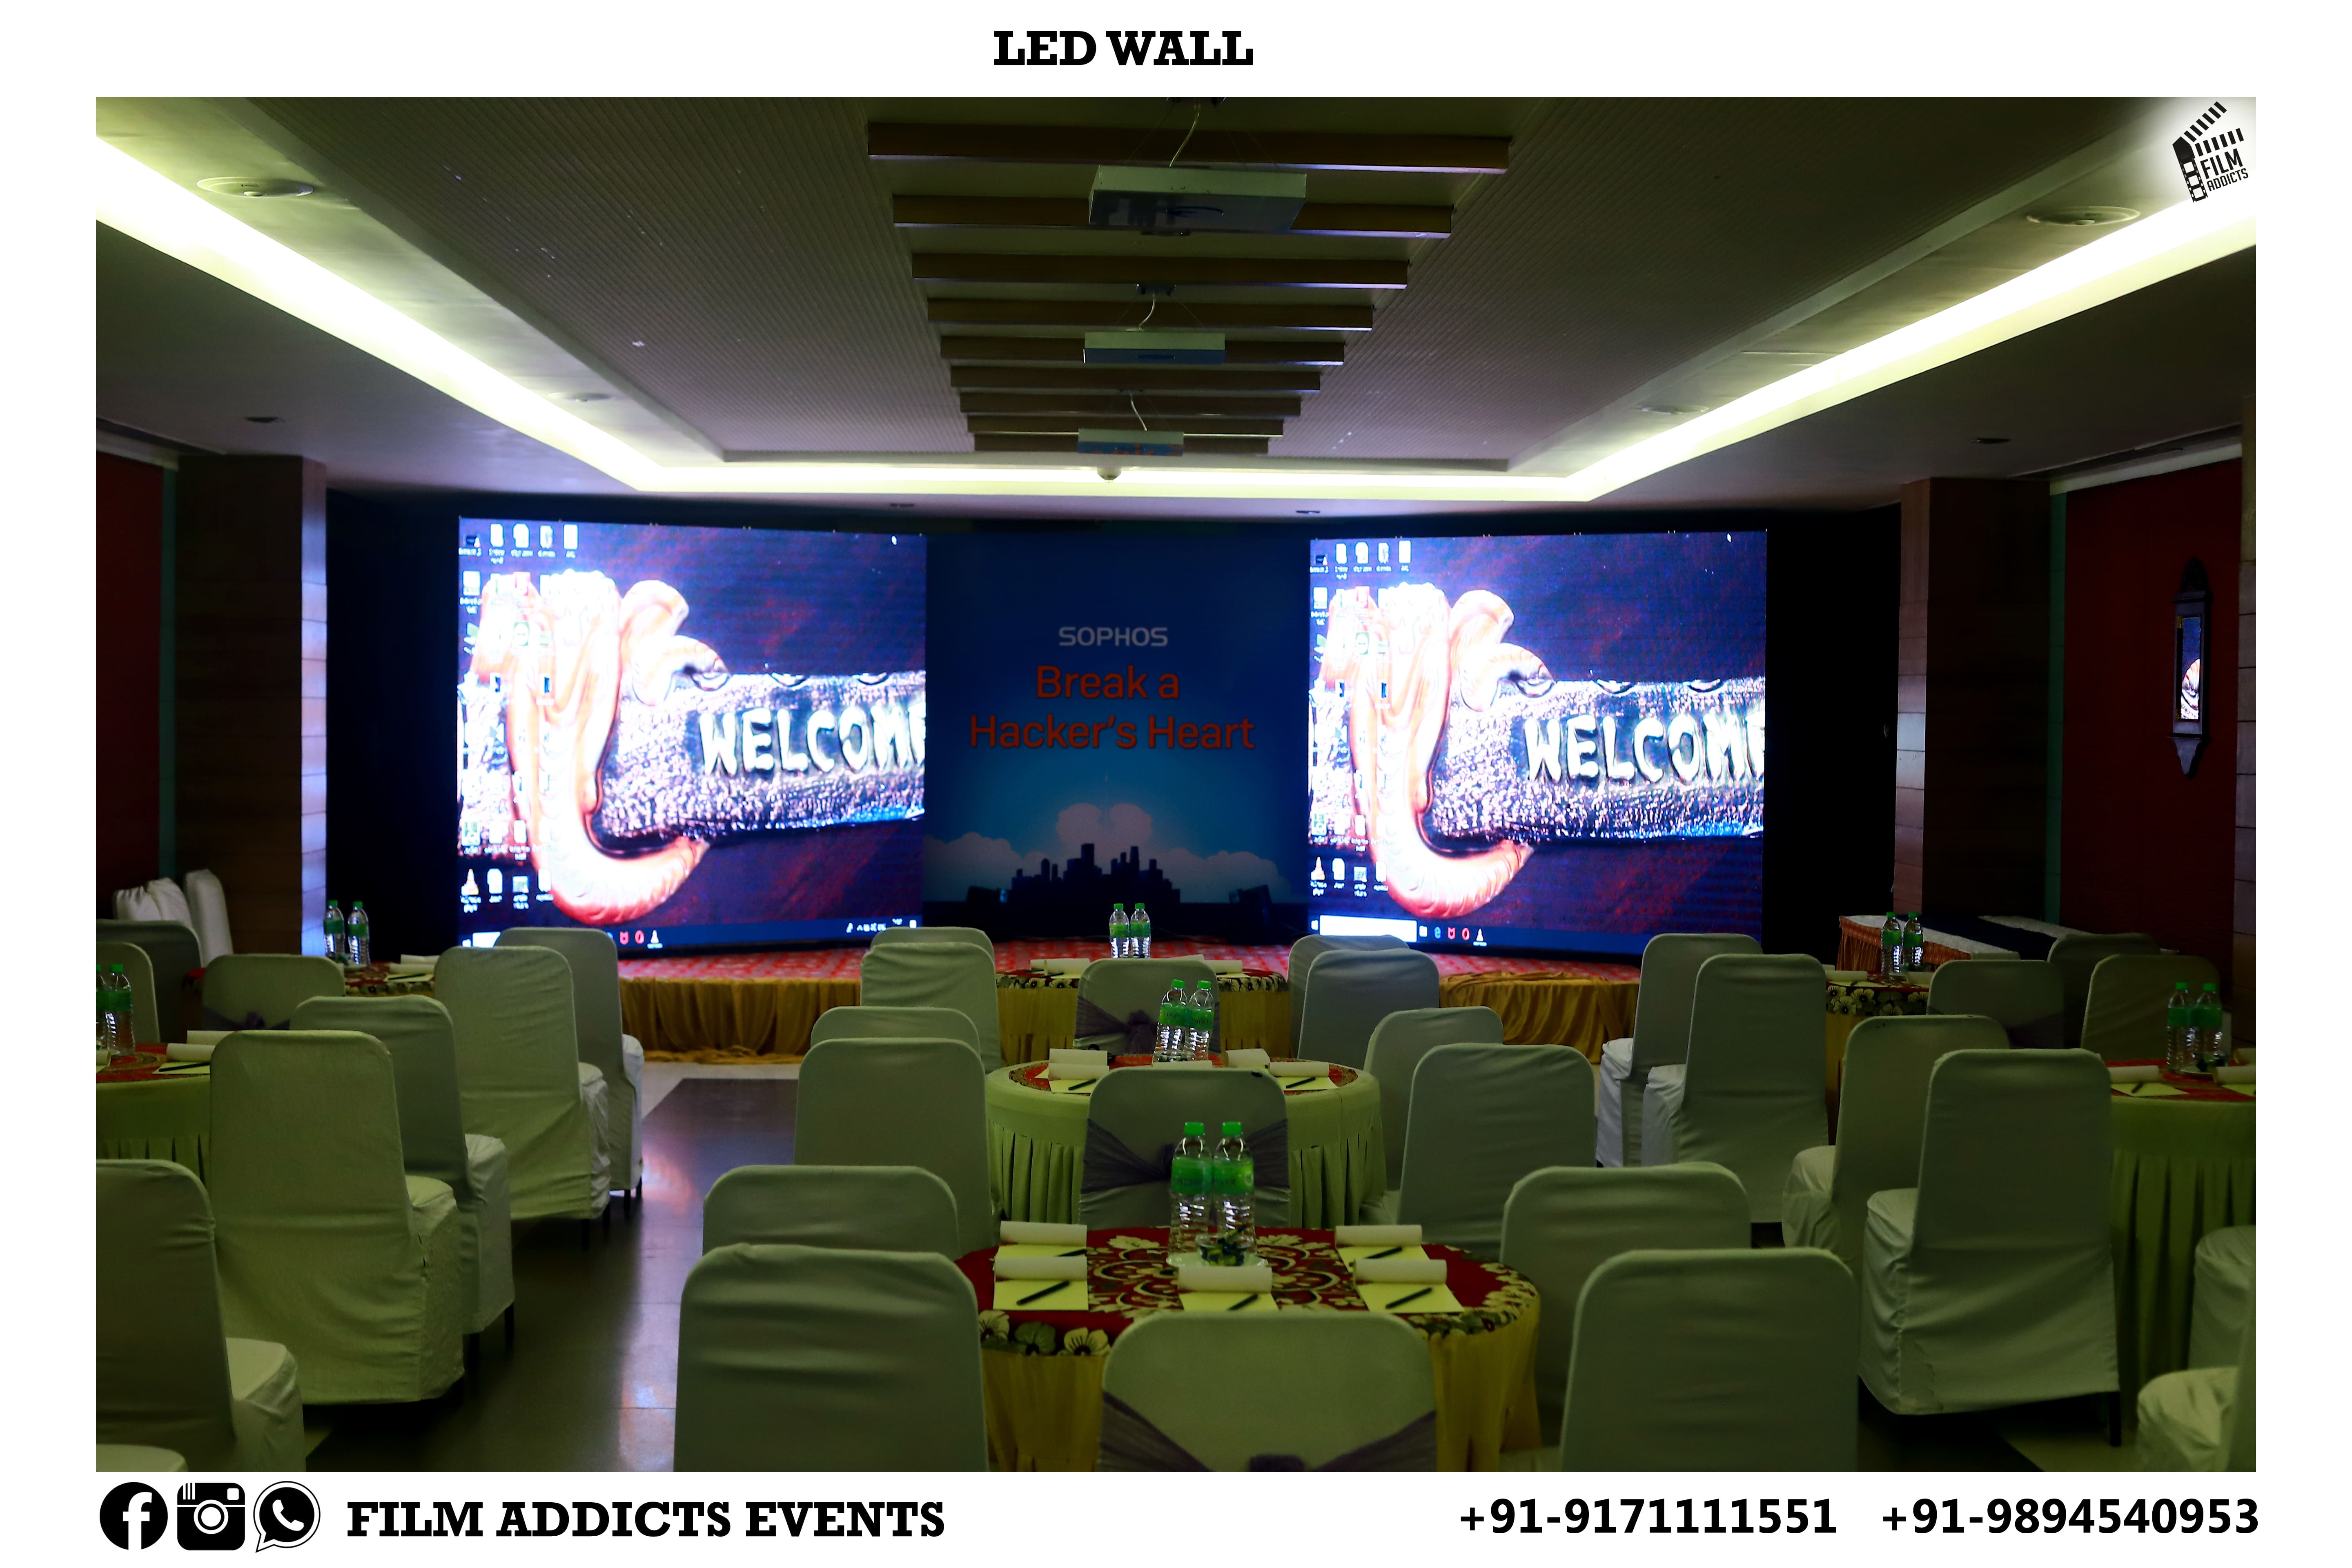 Best LED Video Wall Rental Services in Dindigul, Best LED Wall Services In Dindigul ,Best LED Wall Rental Services In Dindigul, Best Budget LED Wall Rental  Services in Dindigul, Best Wedding LED Wall Rentals In Dindigul, Best clarity in led wall rentals in Dindigul, Best cost-effective display rentals in Dindigul, Best crisp, bright, high resolution led video services in Dindigul, Best led wall rental services in Dindigul, Best tailored lighting, vision and sound solutions led rentals in Dindigul, Best outstanding new LED panels rental Service in Dindigul, Best Indoor and Outdoor LED panels rental Service in Dindigul, Best high resolution LED display rental Service in Dindigul, Best Wedding LED wall rentals in Dindigul, Best Grand wedding LED wall rentals in Dindigul, Best LED wall rental Service in Dindigul, Best LED Video Services in Dindigul, Best Grand Wedding LED wall Renatls in Dindigul, Best LED wall Rentals for Grand Occasions in Dindigul, Best Wedding LED Video Services in Dindigul, Best Wedding LED video wall Rental Services in Dindigul, Best LED Video Wall Rentals for Grand Occassions in Dindigul, Best LED Video Wall Rentals for events in Dindigul, Best LED video Services for live events in Dindigul, Best video wall rentals for Live events in Dindigul, Best LED Video Wall Rentals for Live events in Dindigul, Best LED Video Wall On Hire in Dindigul, Best LED Video Wall Services in Dindigul, Best LED Video Wall Service Systems in Dindigul, Best LED Wall Washer Light Services in Dindigul, Best LED Wall Light Services in Dindigul, Best LED Wall Mount Bracket Services in Dindigul.